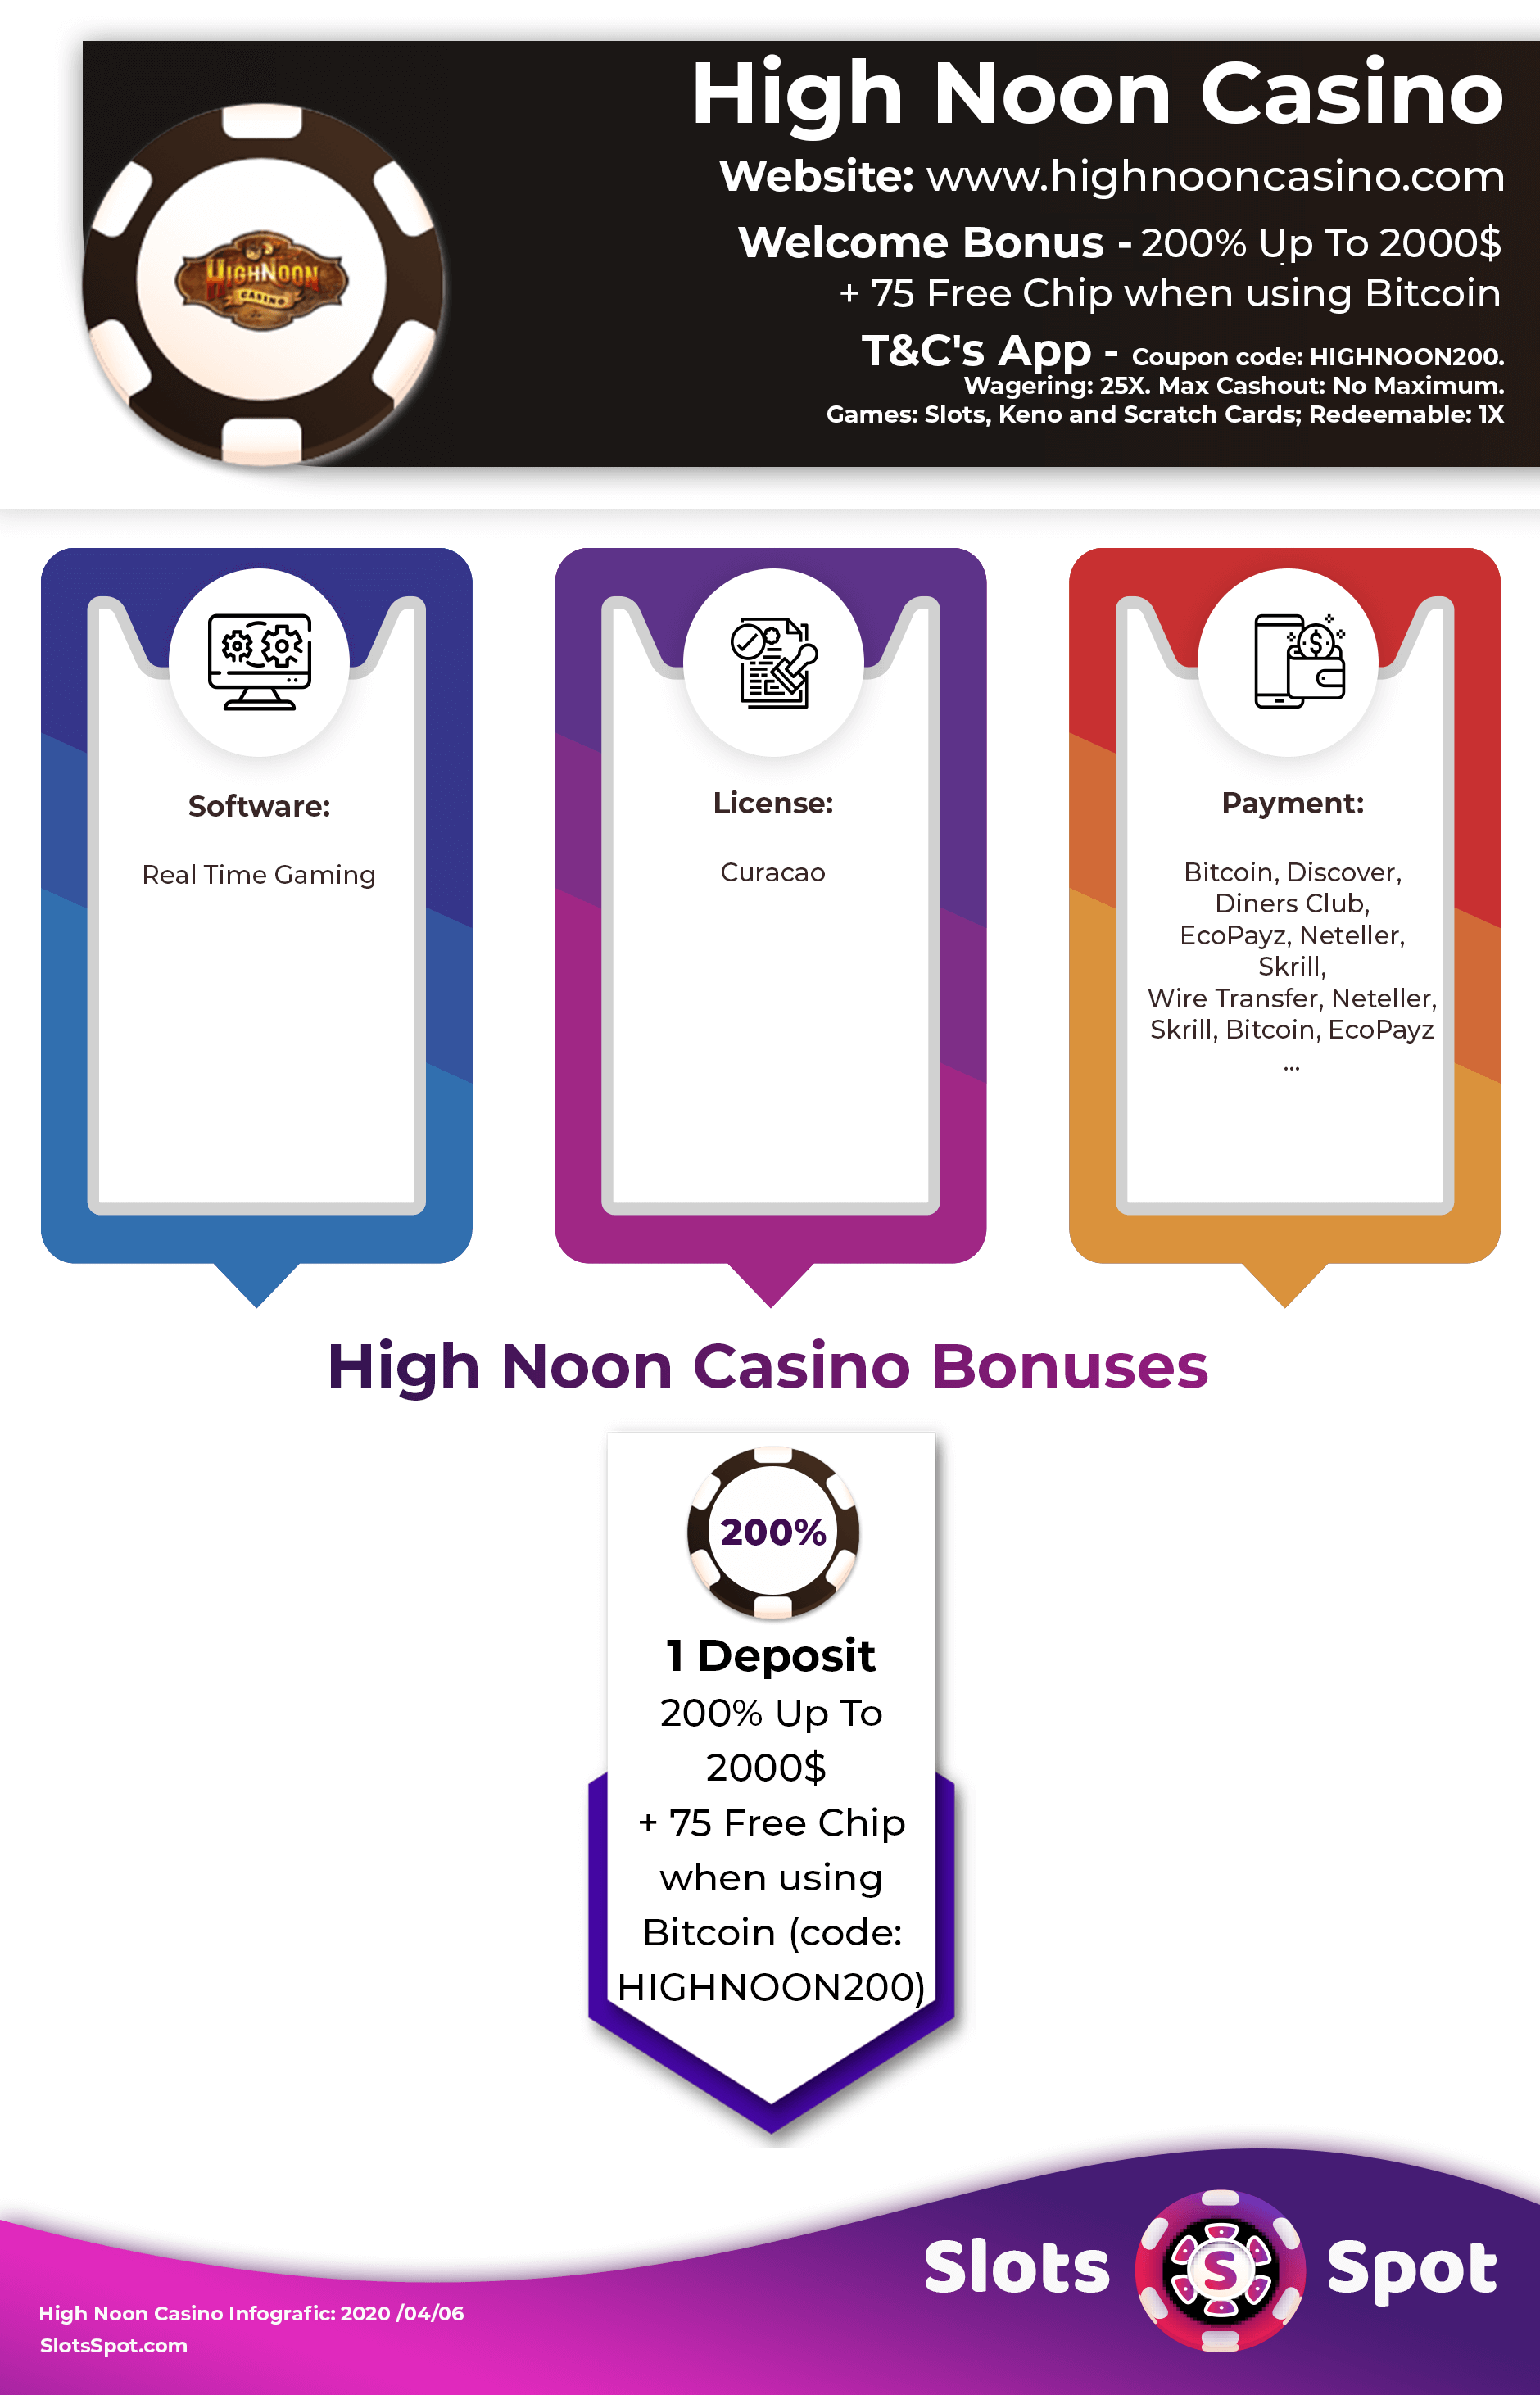 No Deposit Codes For High Noon Casino